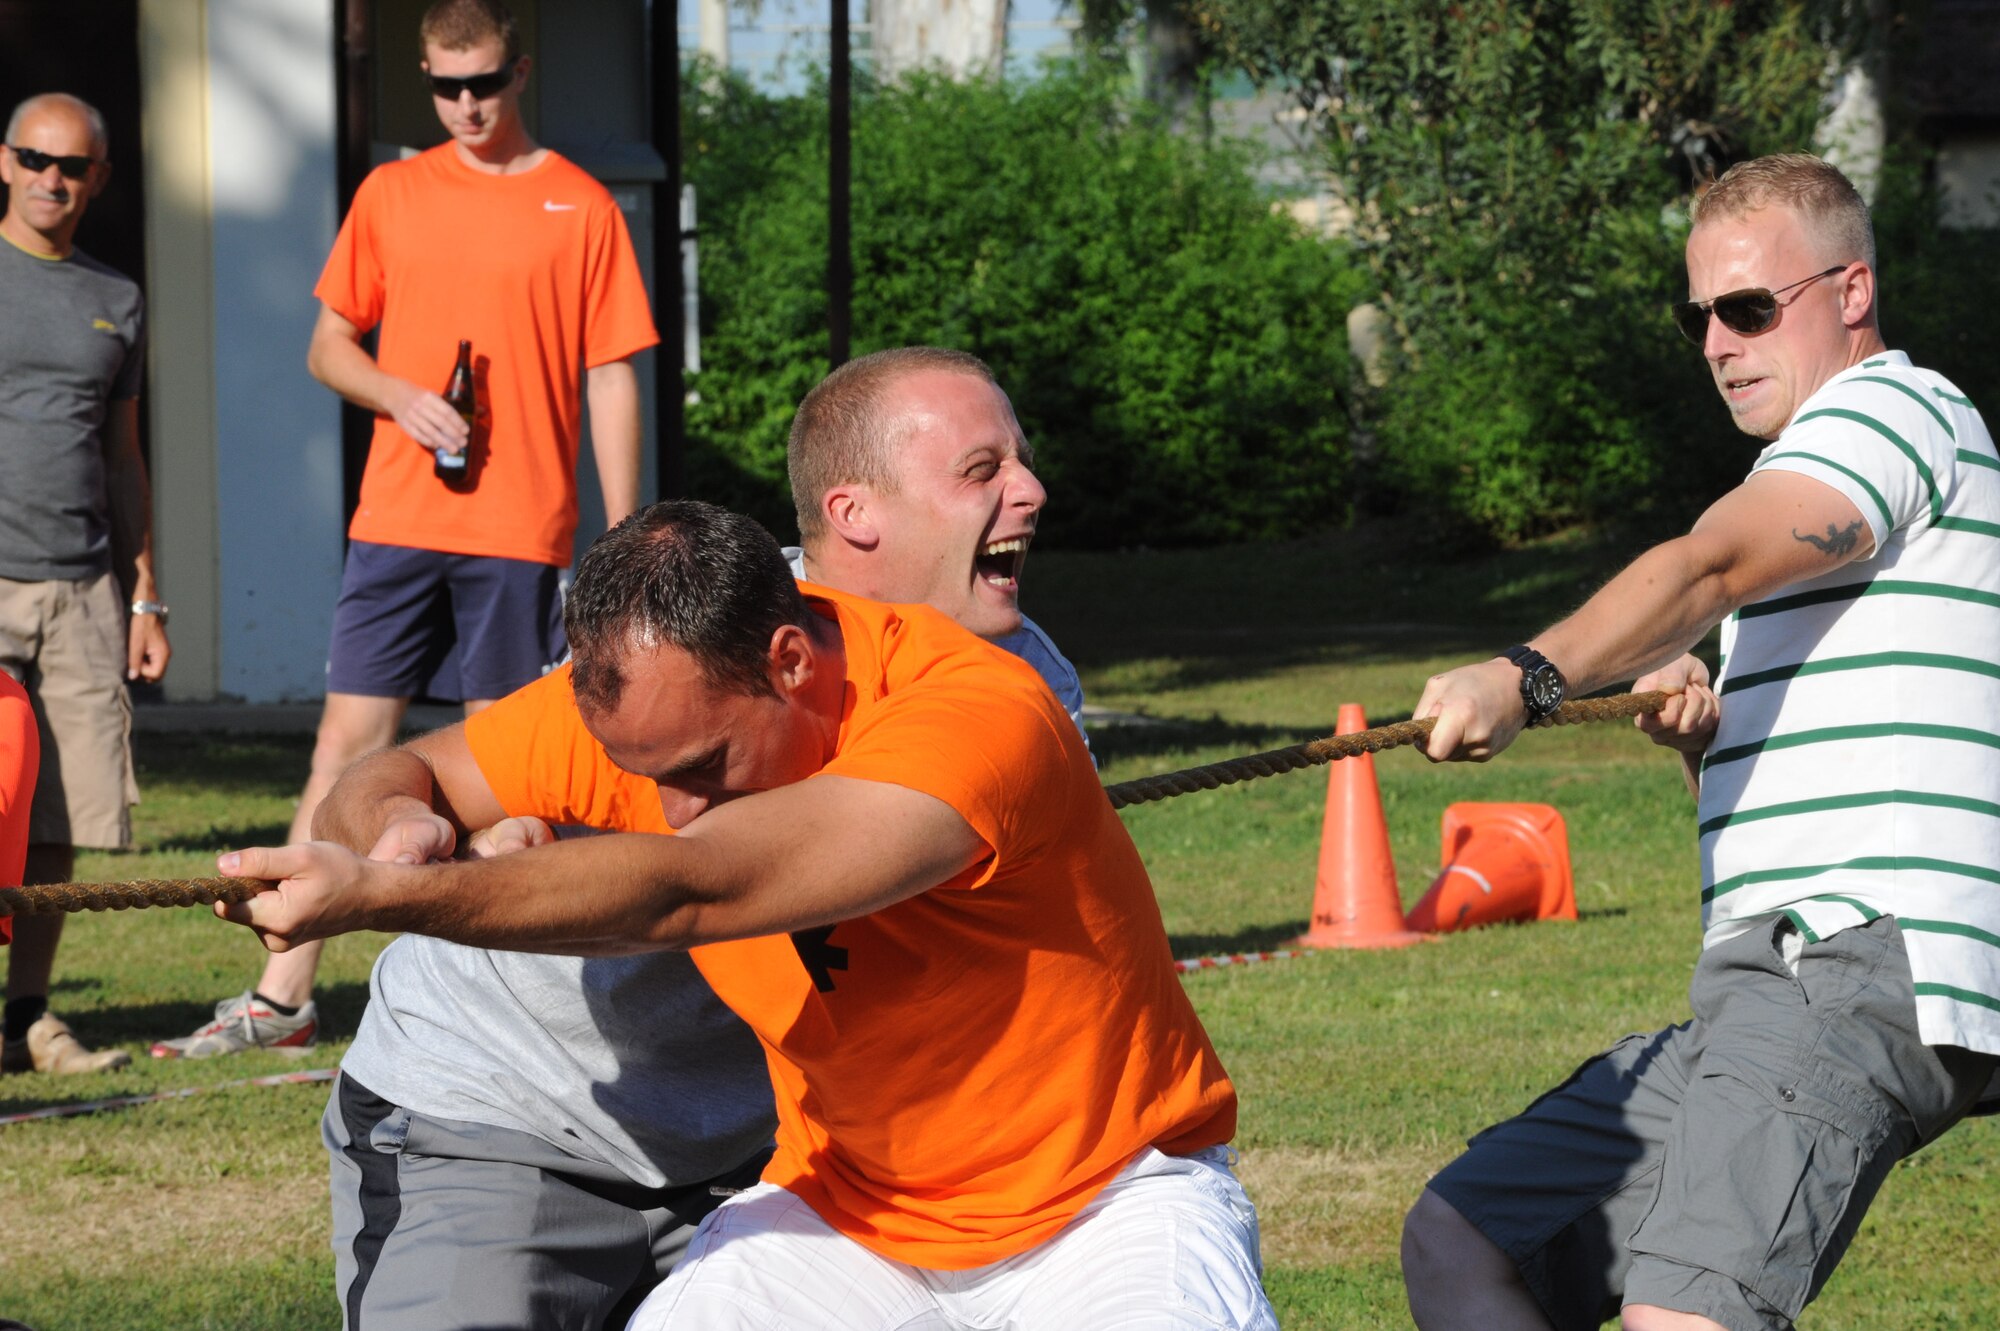 Dutch soldiers participate in a touwtrekken toernooi (tug-of-war tournament) during a Koninginnedag, or Queen’s Day, celebration held at Arkadas Park April 25, 2013, Incirlik Air Base Turkey. The Dutch, who are deployed to Incirlik Air Base as part of a NATO-led operation to boost Turkey’s air defense capabilities by providing Patriot missile batteries, invited U.S. and Turkish personnel to attend the Dutch celebration of their queen’s birthday April 30 each year. (U.S. Air Force photo by 1st Lt. David Liapis/Released)